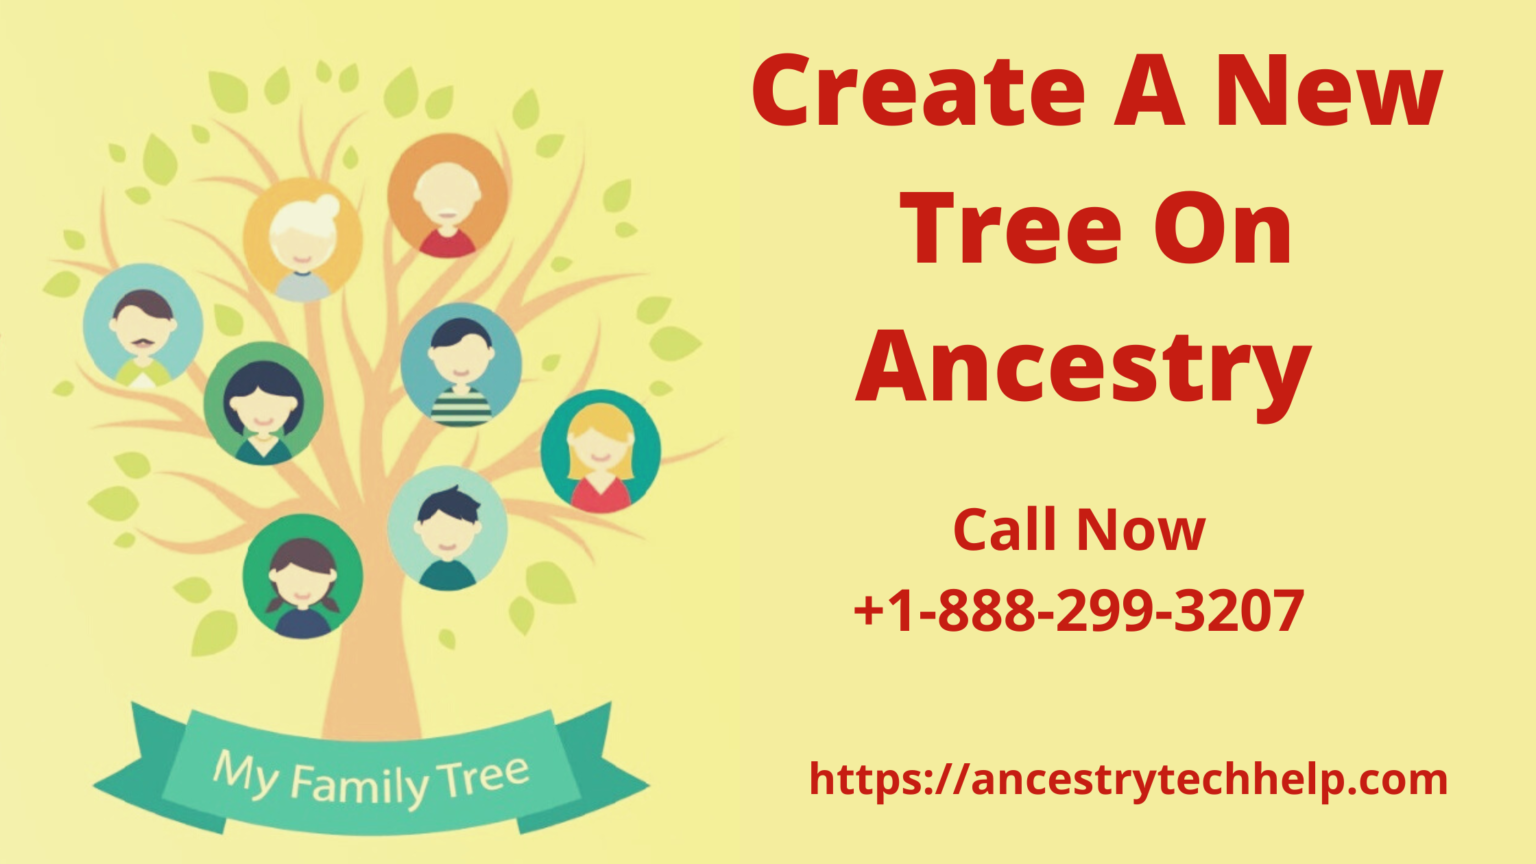 How To Create A New Tree On Ancestry Ancestry Tech Help